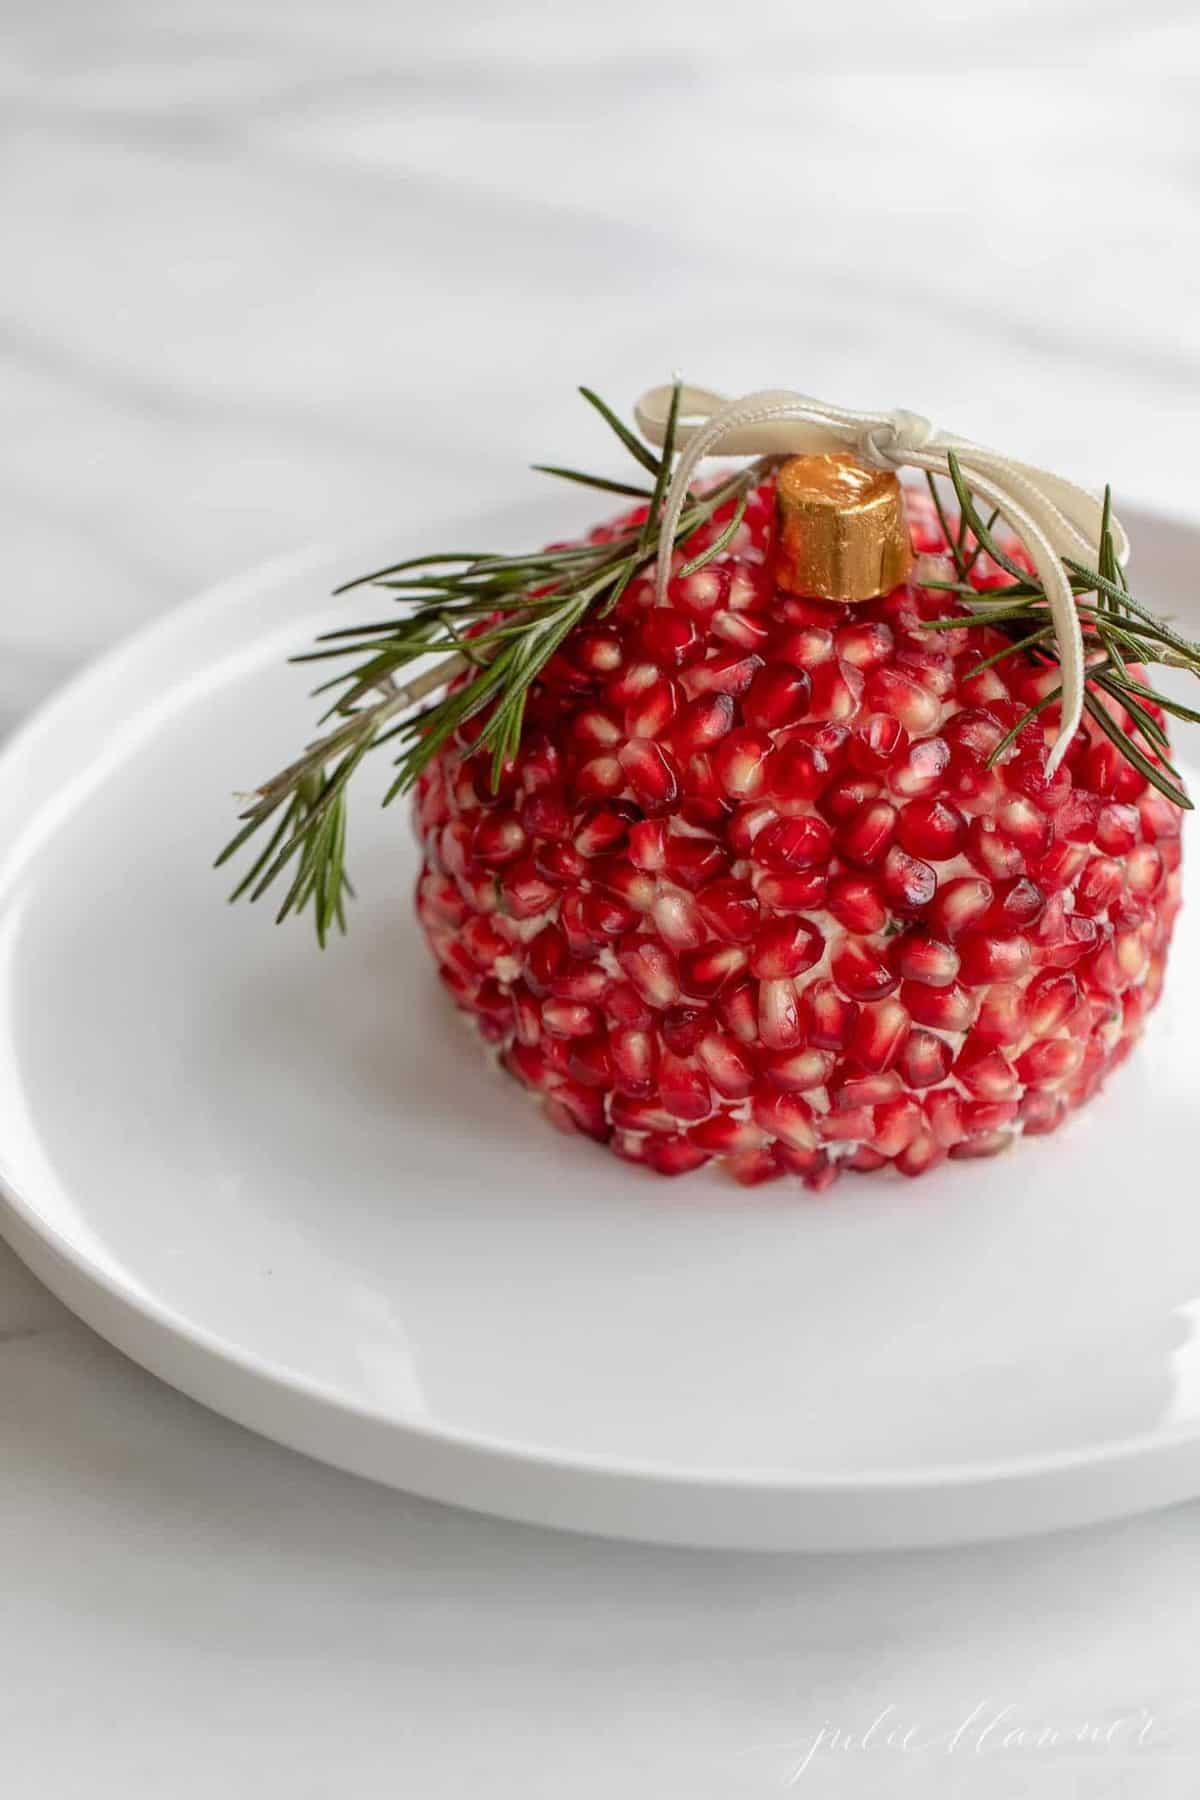 A holiday cheese ball in the shape of a Christmas ornament, covered in pomegranate seeds.